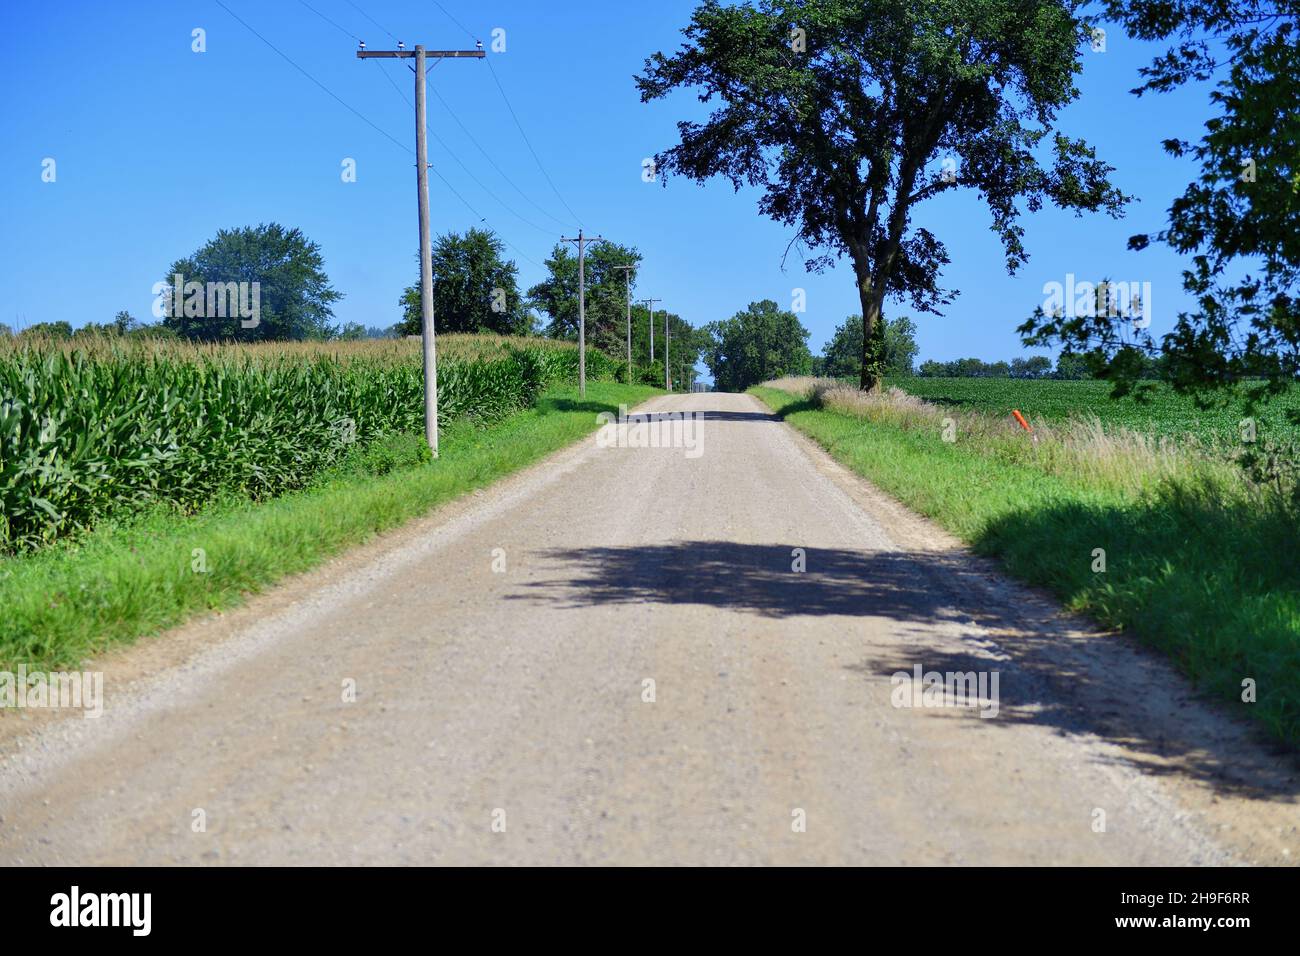 LaGrange, Indiana, USA. An empty section of road stretching through a rural area of northeastern Indiana. The area is dotted by Amish farms. Stock Photo